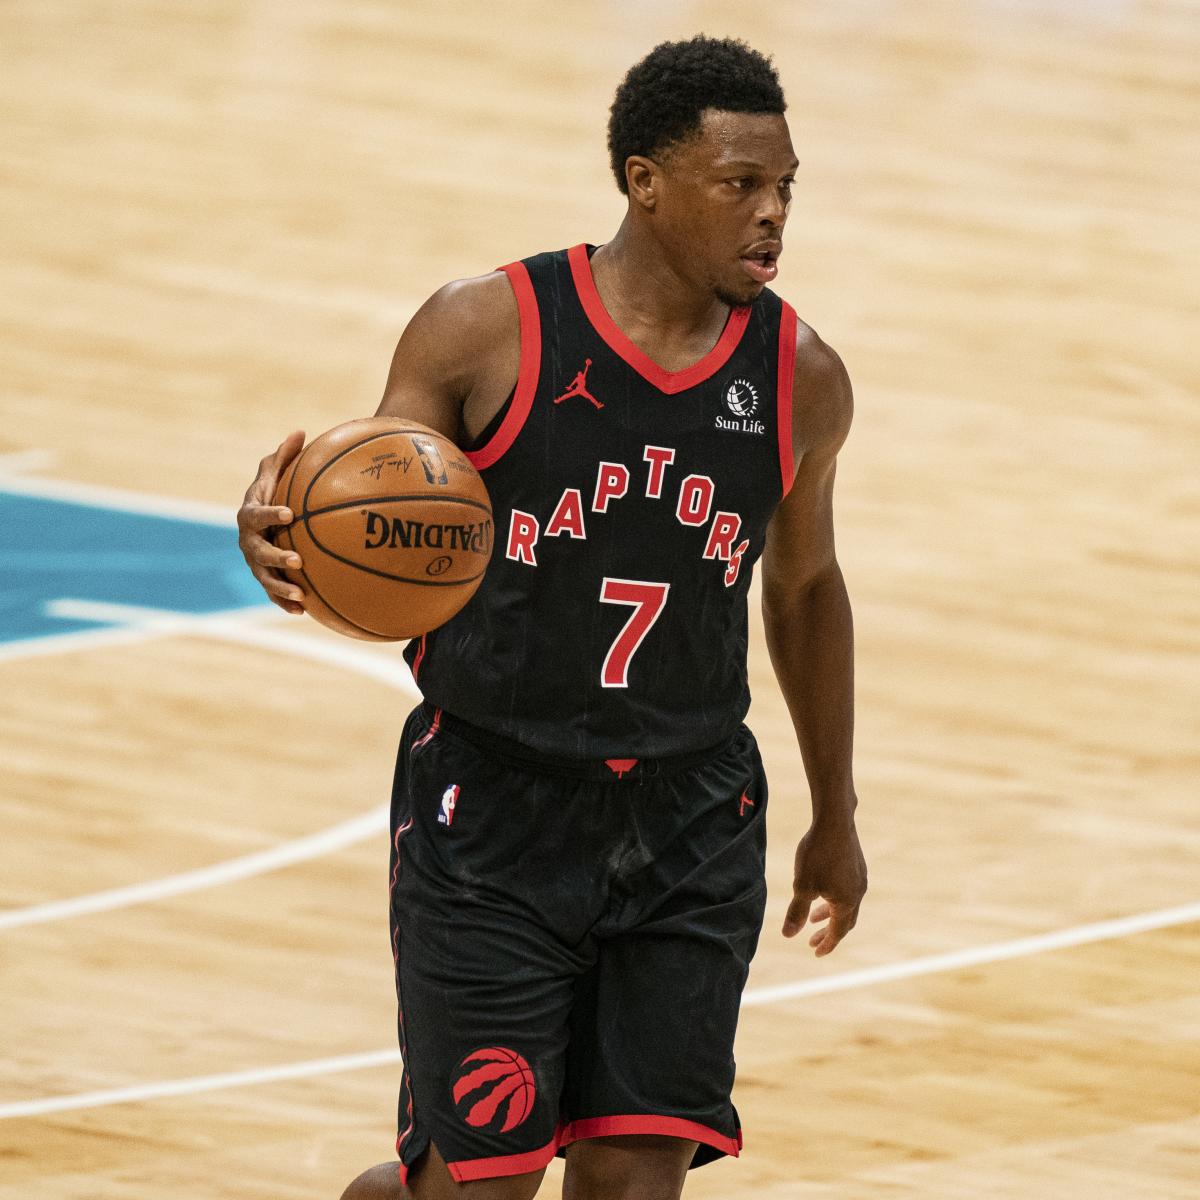 Woj Lakers A Sleeper Team In Kyle Lowry Trade Talks Amid 76ers Heat Interest Bleacher Report Latest News Videos And Highlights